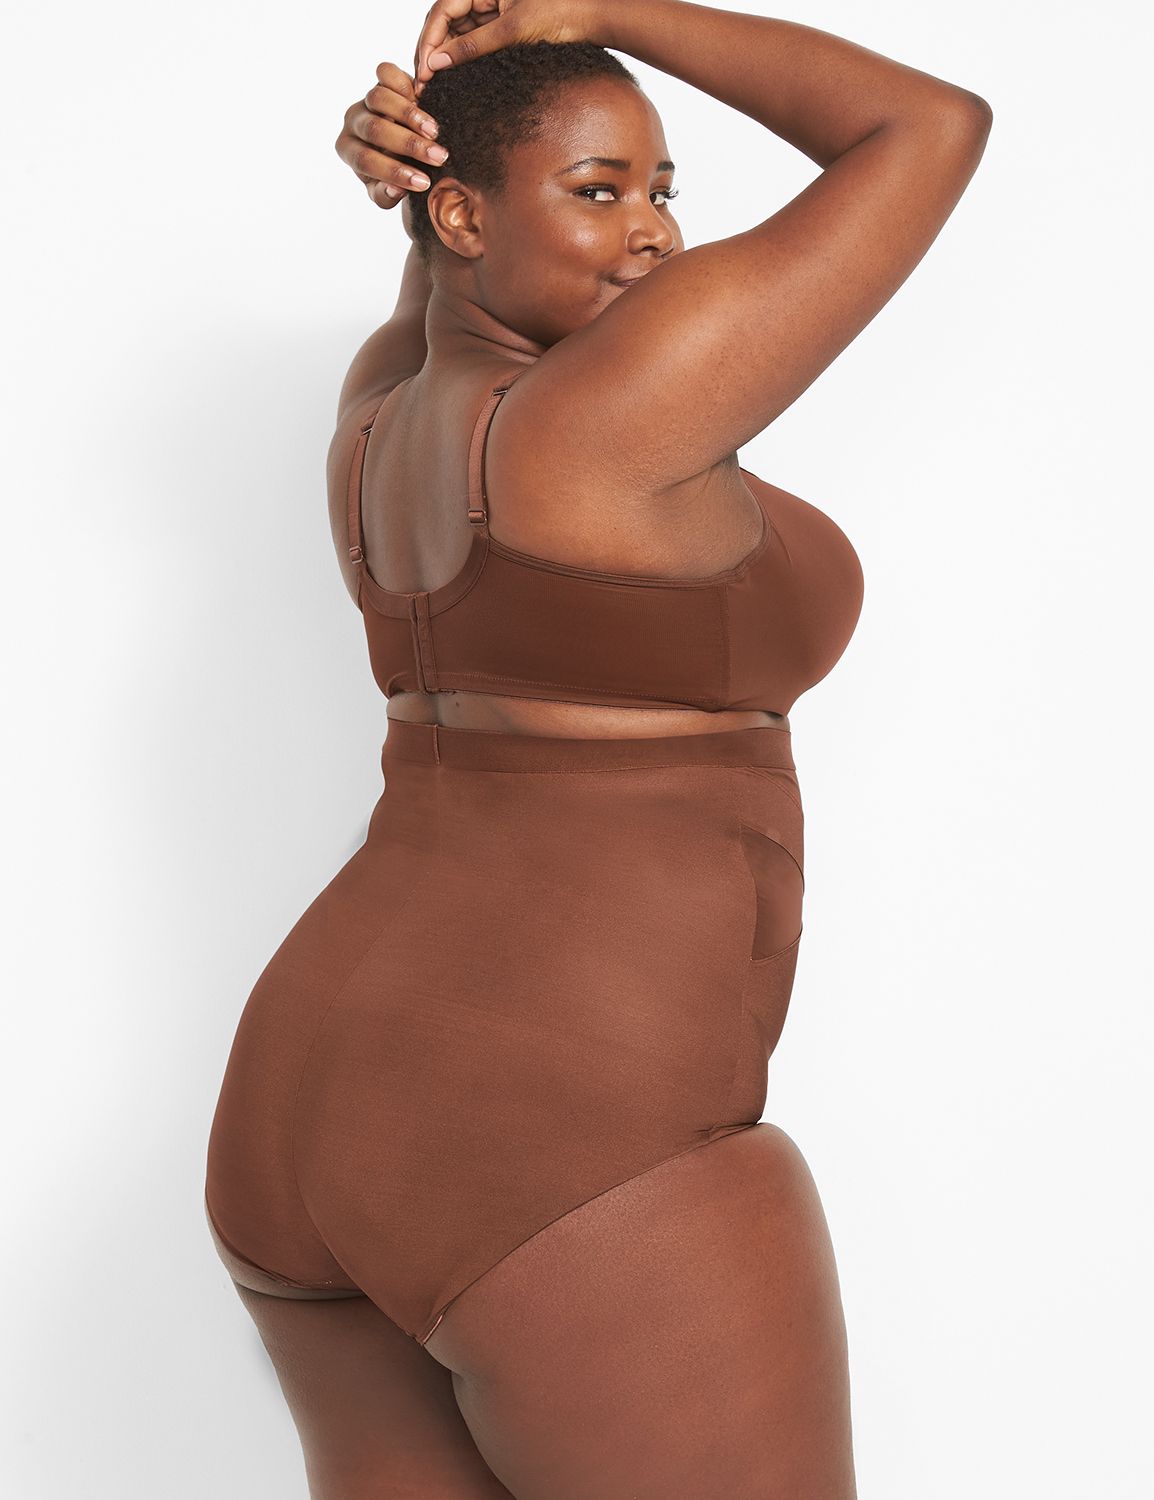 JUST DROPPED: SKIMS BODY. The most comfortable shapewear you will ever wear  is here. Shop new, invisibly smoothing bodysuits, dresses, in